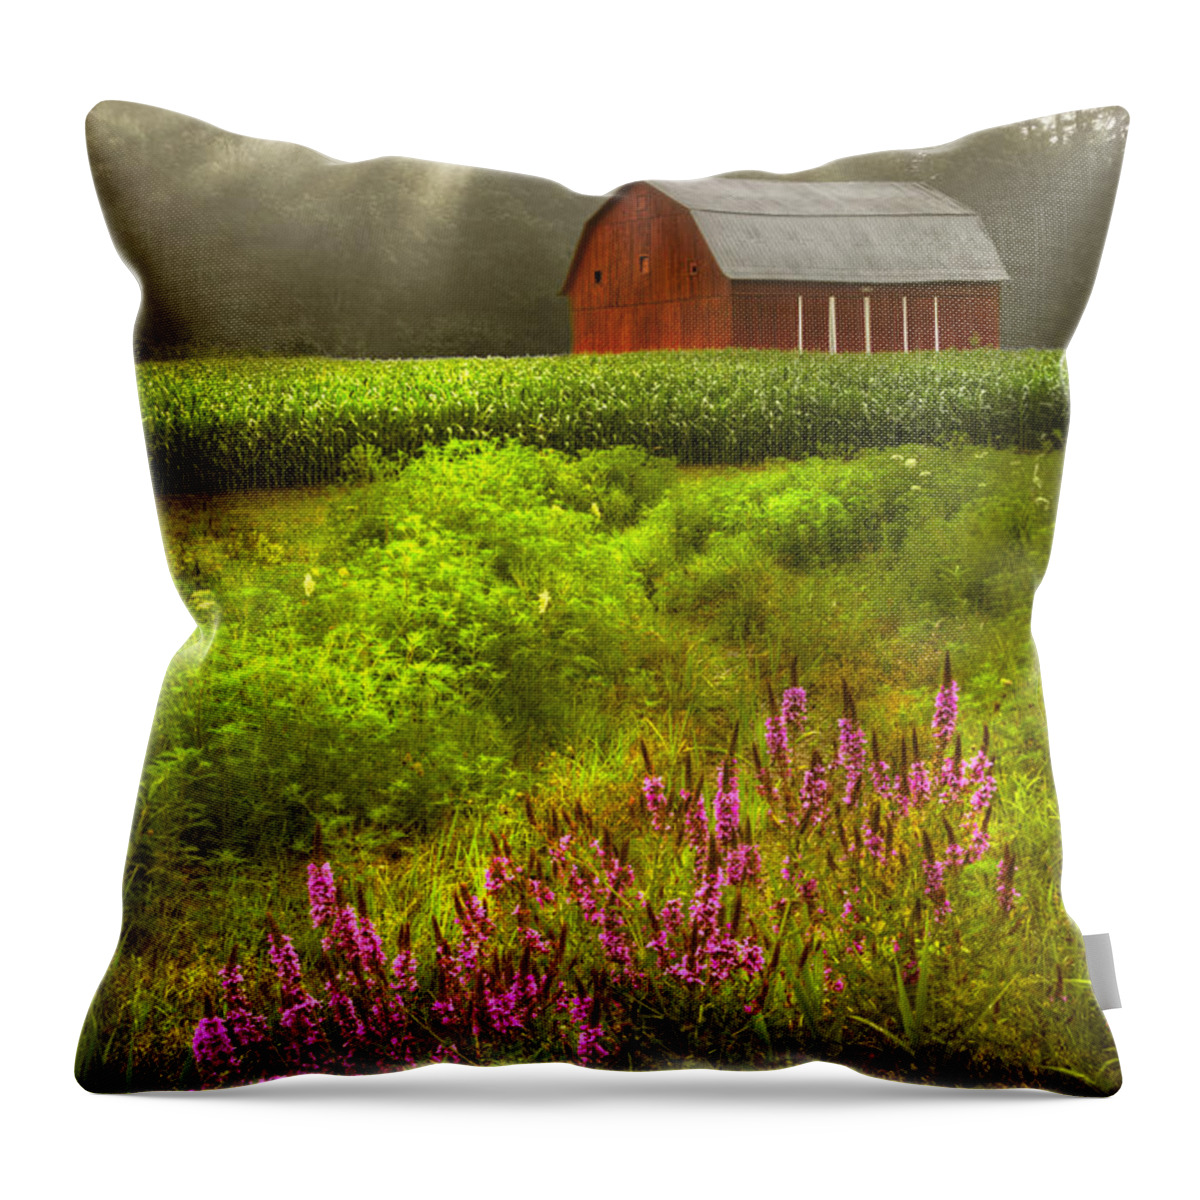 Barn Throw Pillow featuring the photograph Touched by the Sun #2 by Debra and Dave Vanderlaan